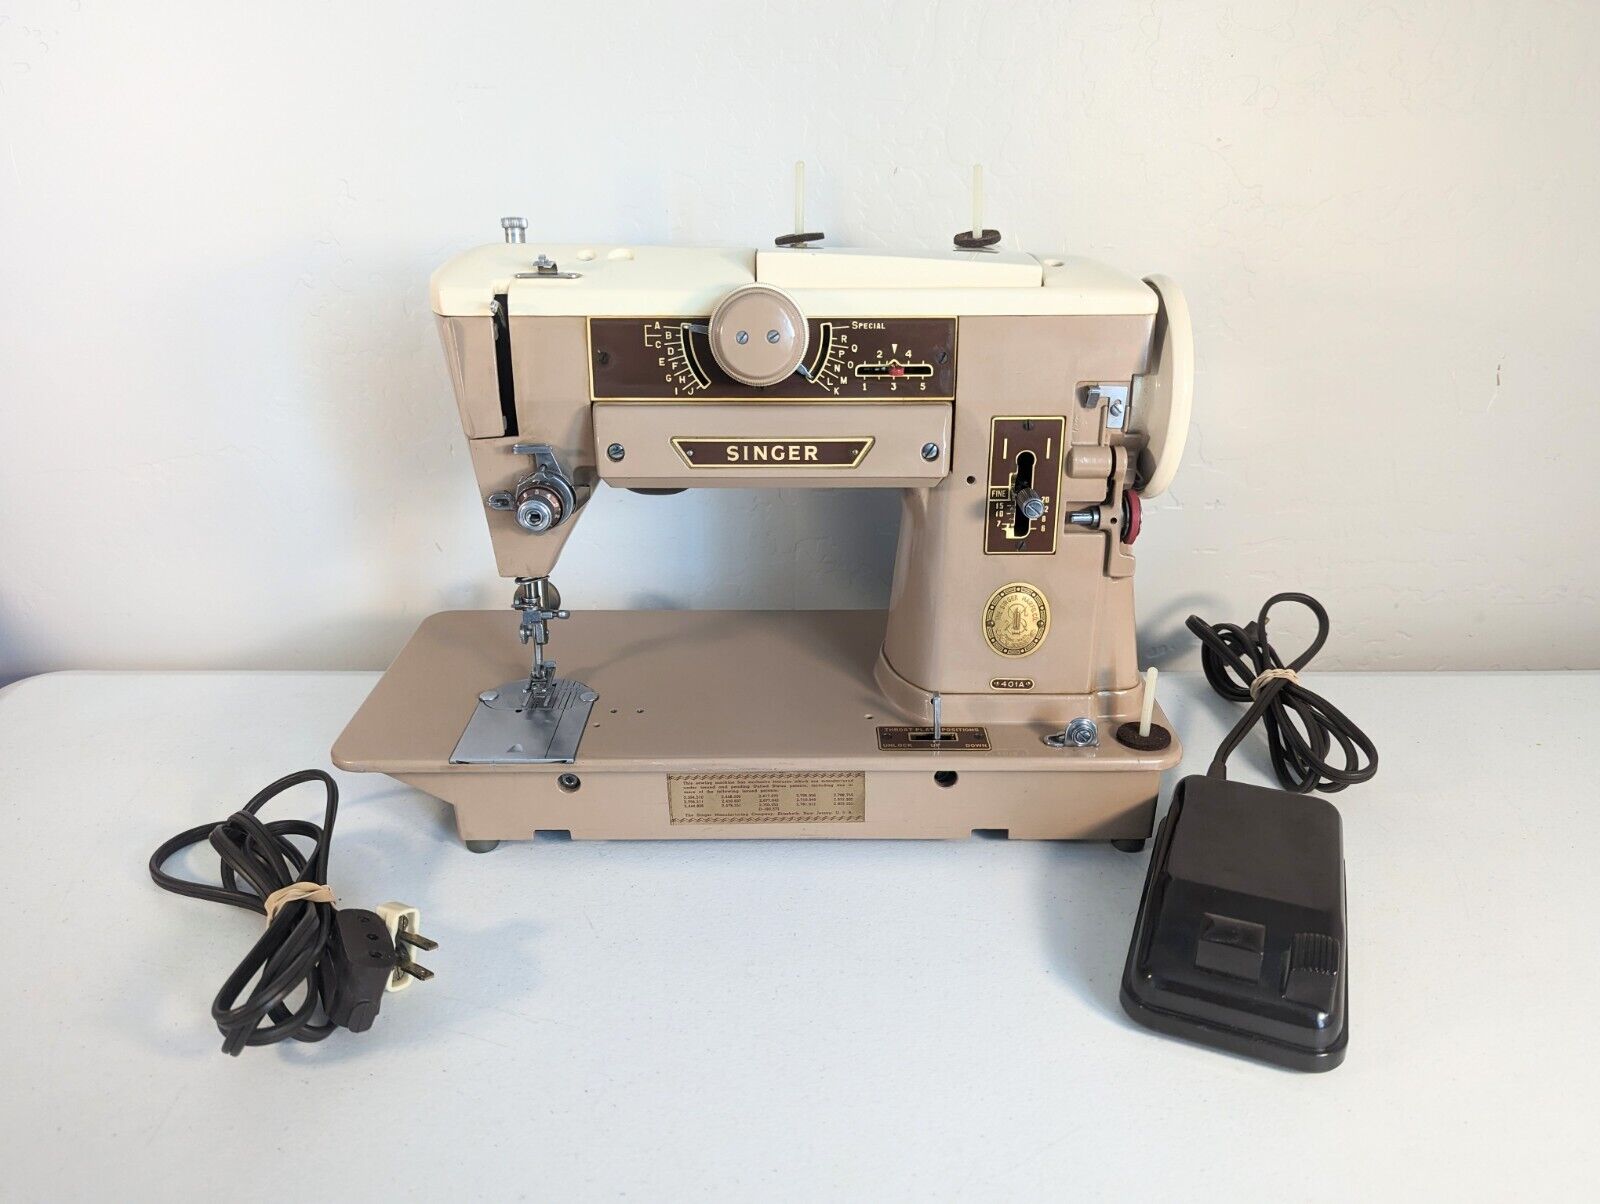 VINTAGE SINGER SLANT-O-MATIC SEWING MACHINE WITH PEDAL MODEL 401A, WORKS 